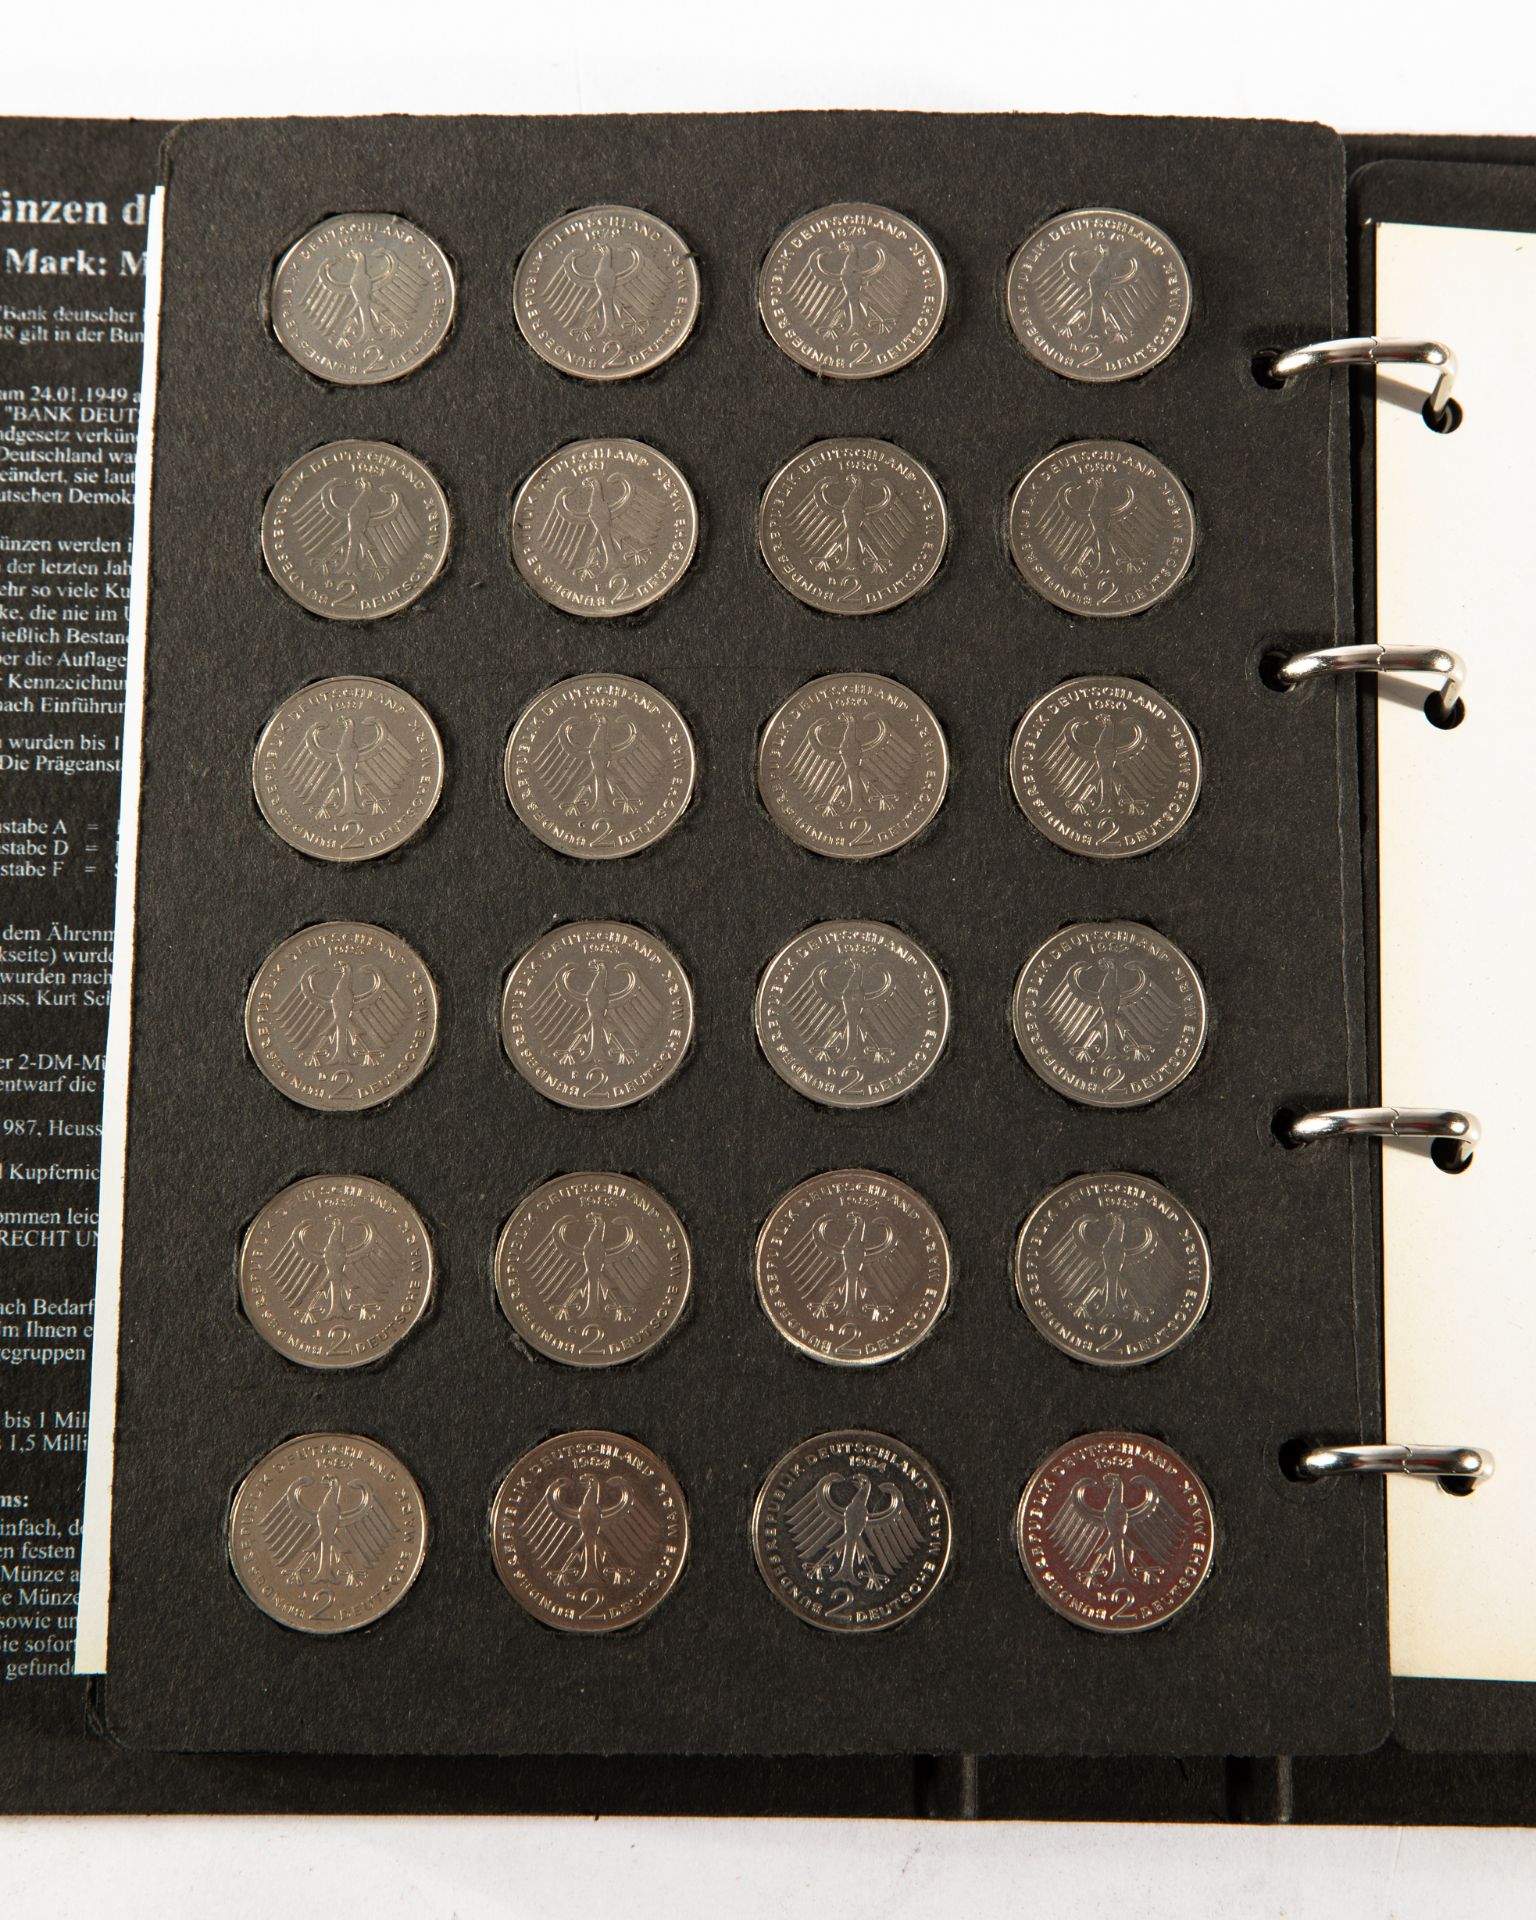 Germany - 2x full coin albums 2 DM Coins 1970-1996 - Image 18 of 33